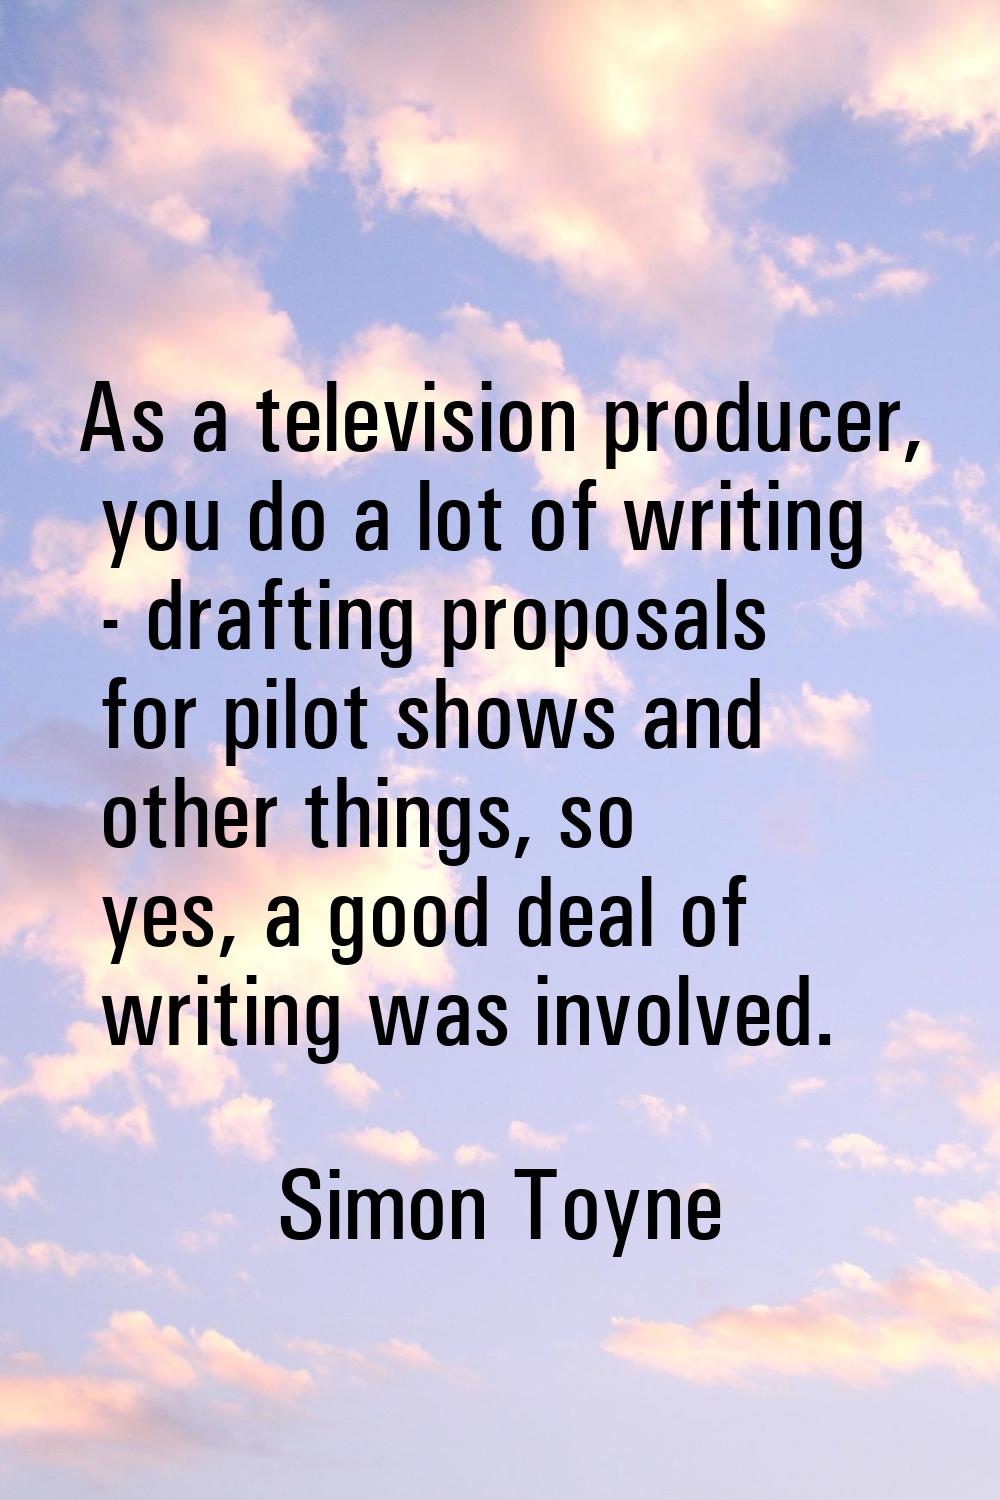 As a television producer, you do a lot of writing - drafting proposals for pilot shows and other th